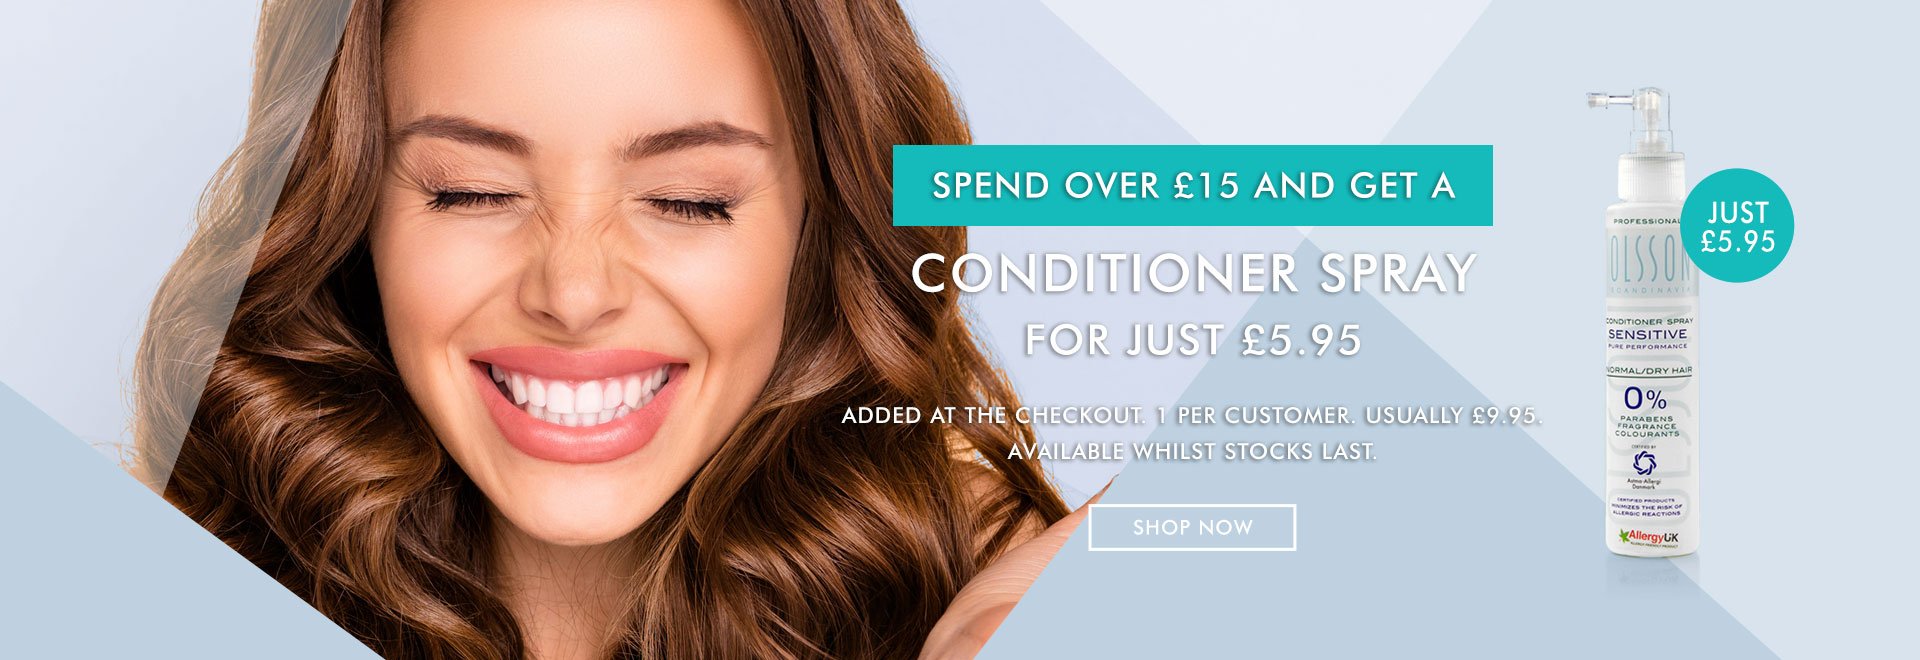 Free Delivery + Conditioner Spray for £5.95 on all orders.